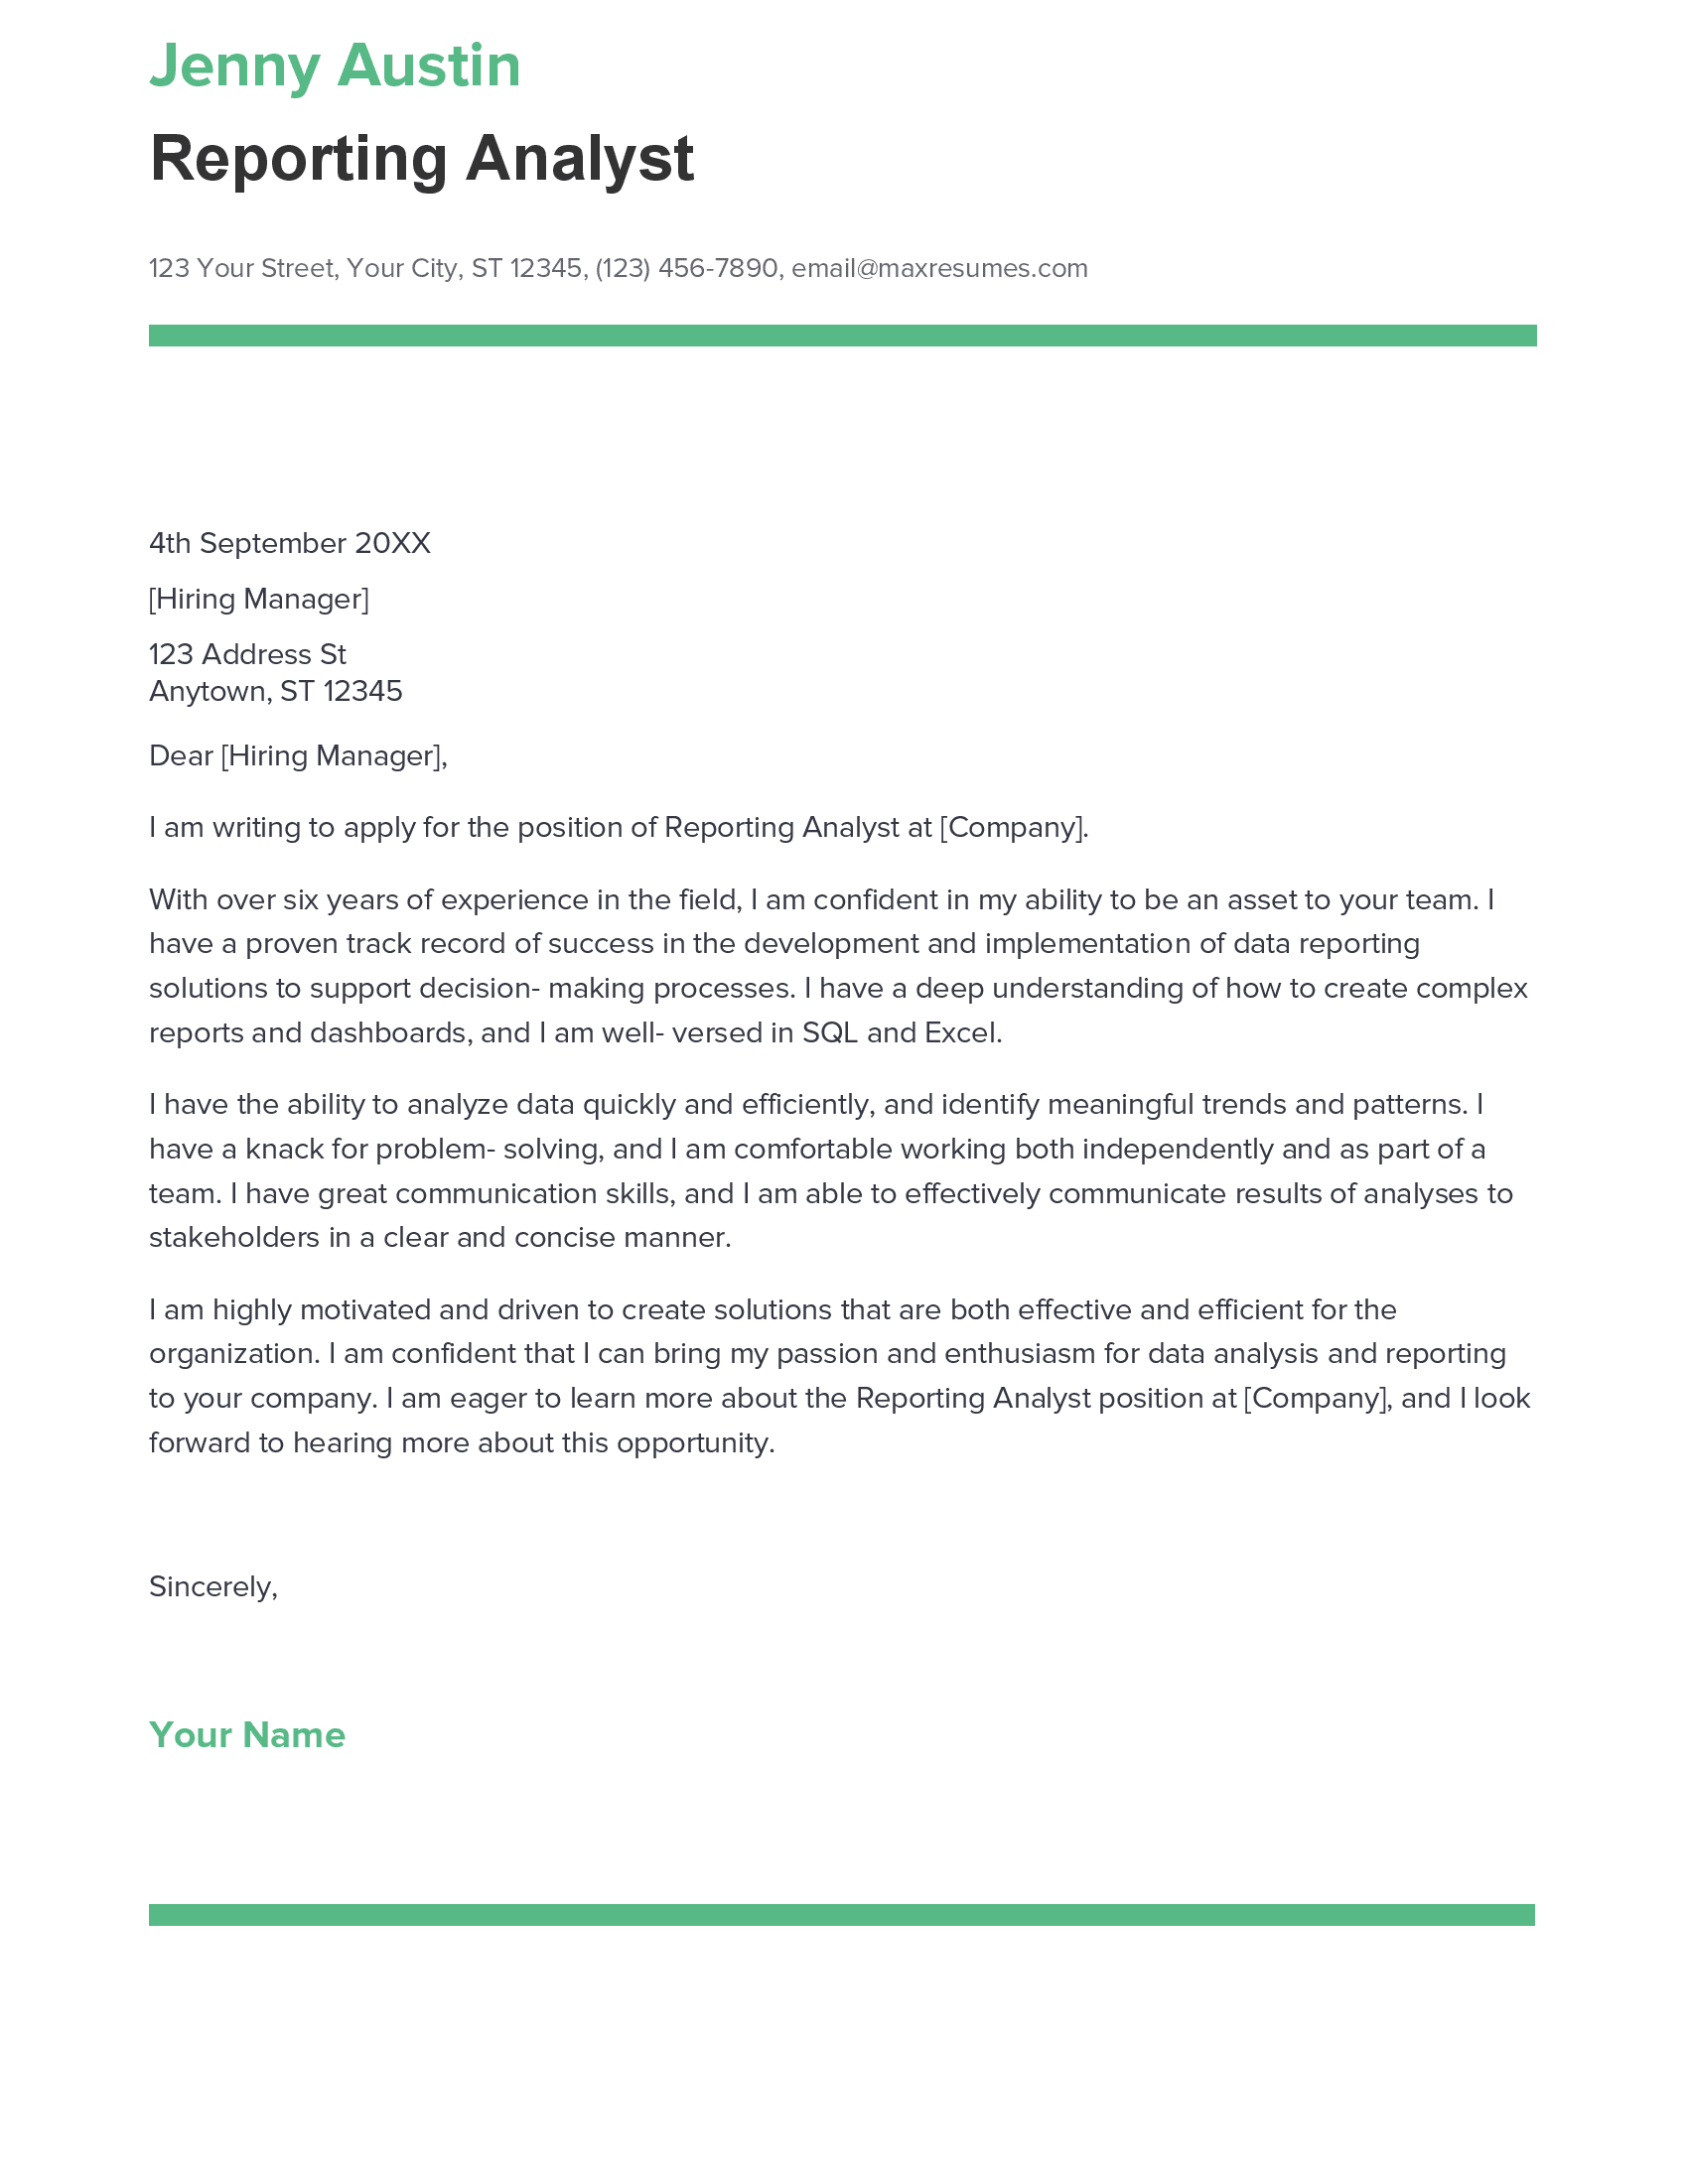 cover letter for an reporting analyst